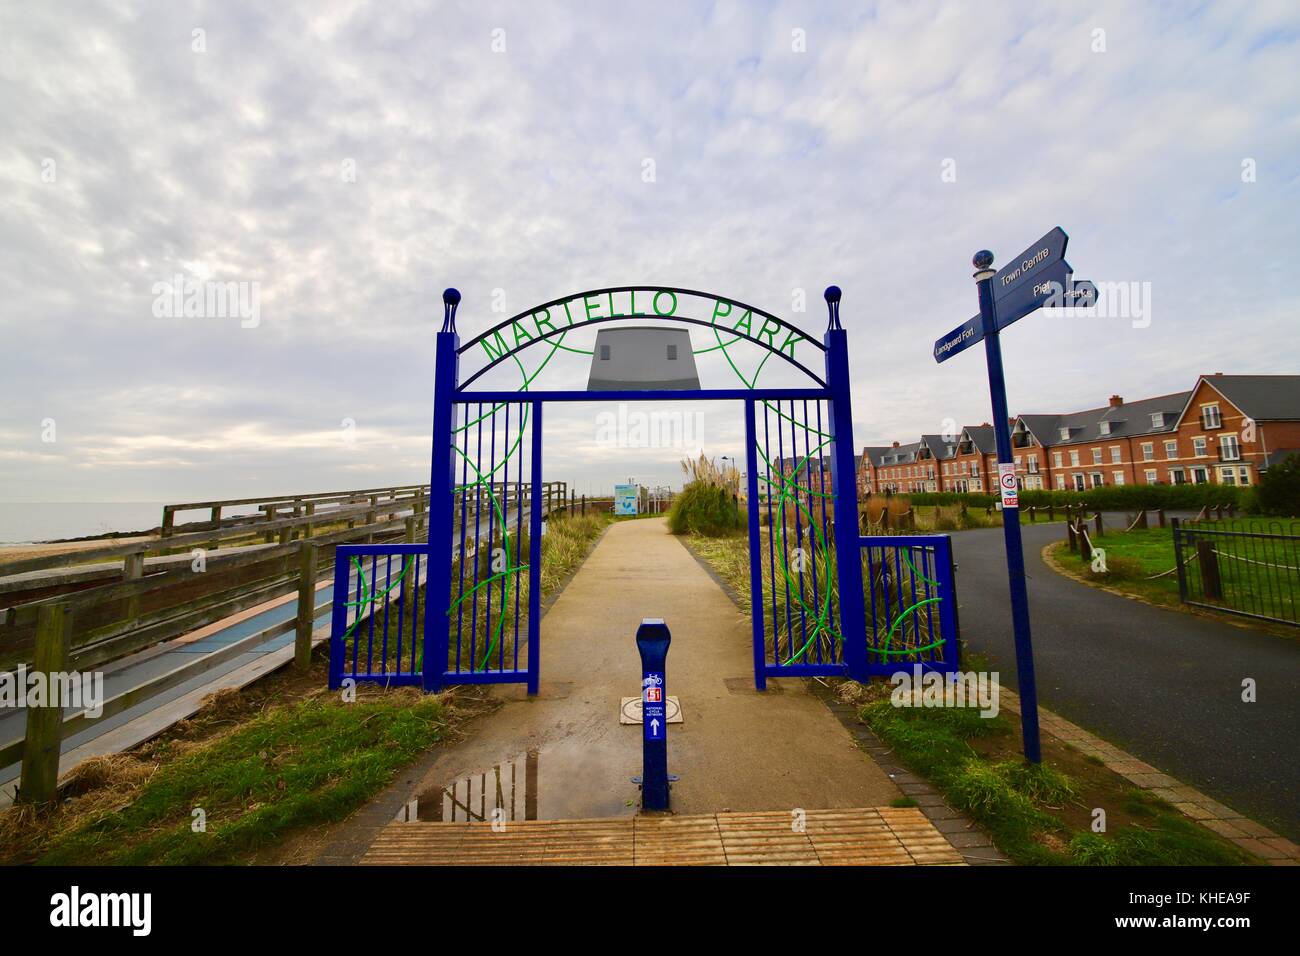 Blue metal entrance gate to Martello Park on the seafront in Felixstowe, Suffolk. Stock Photo